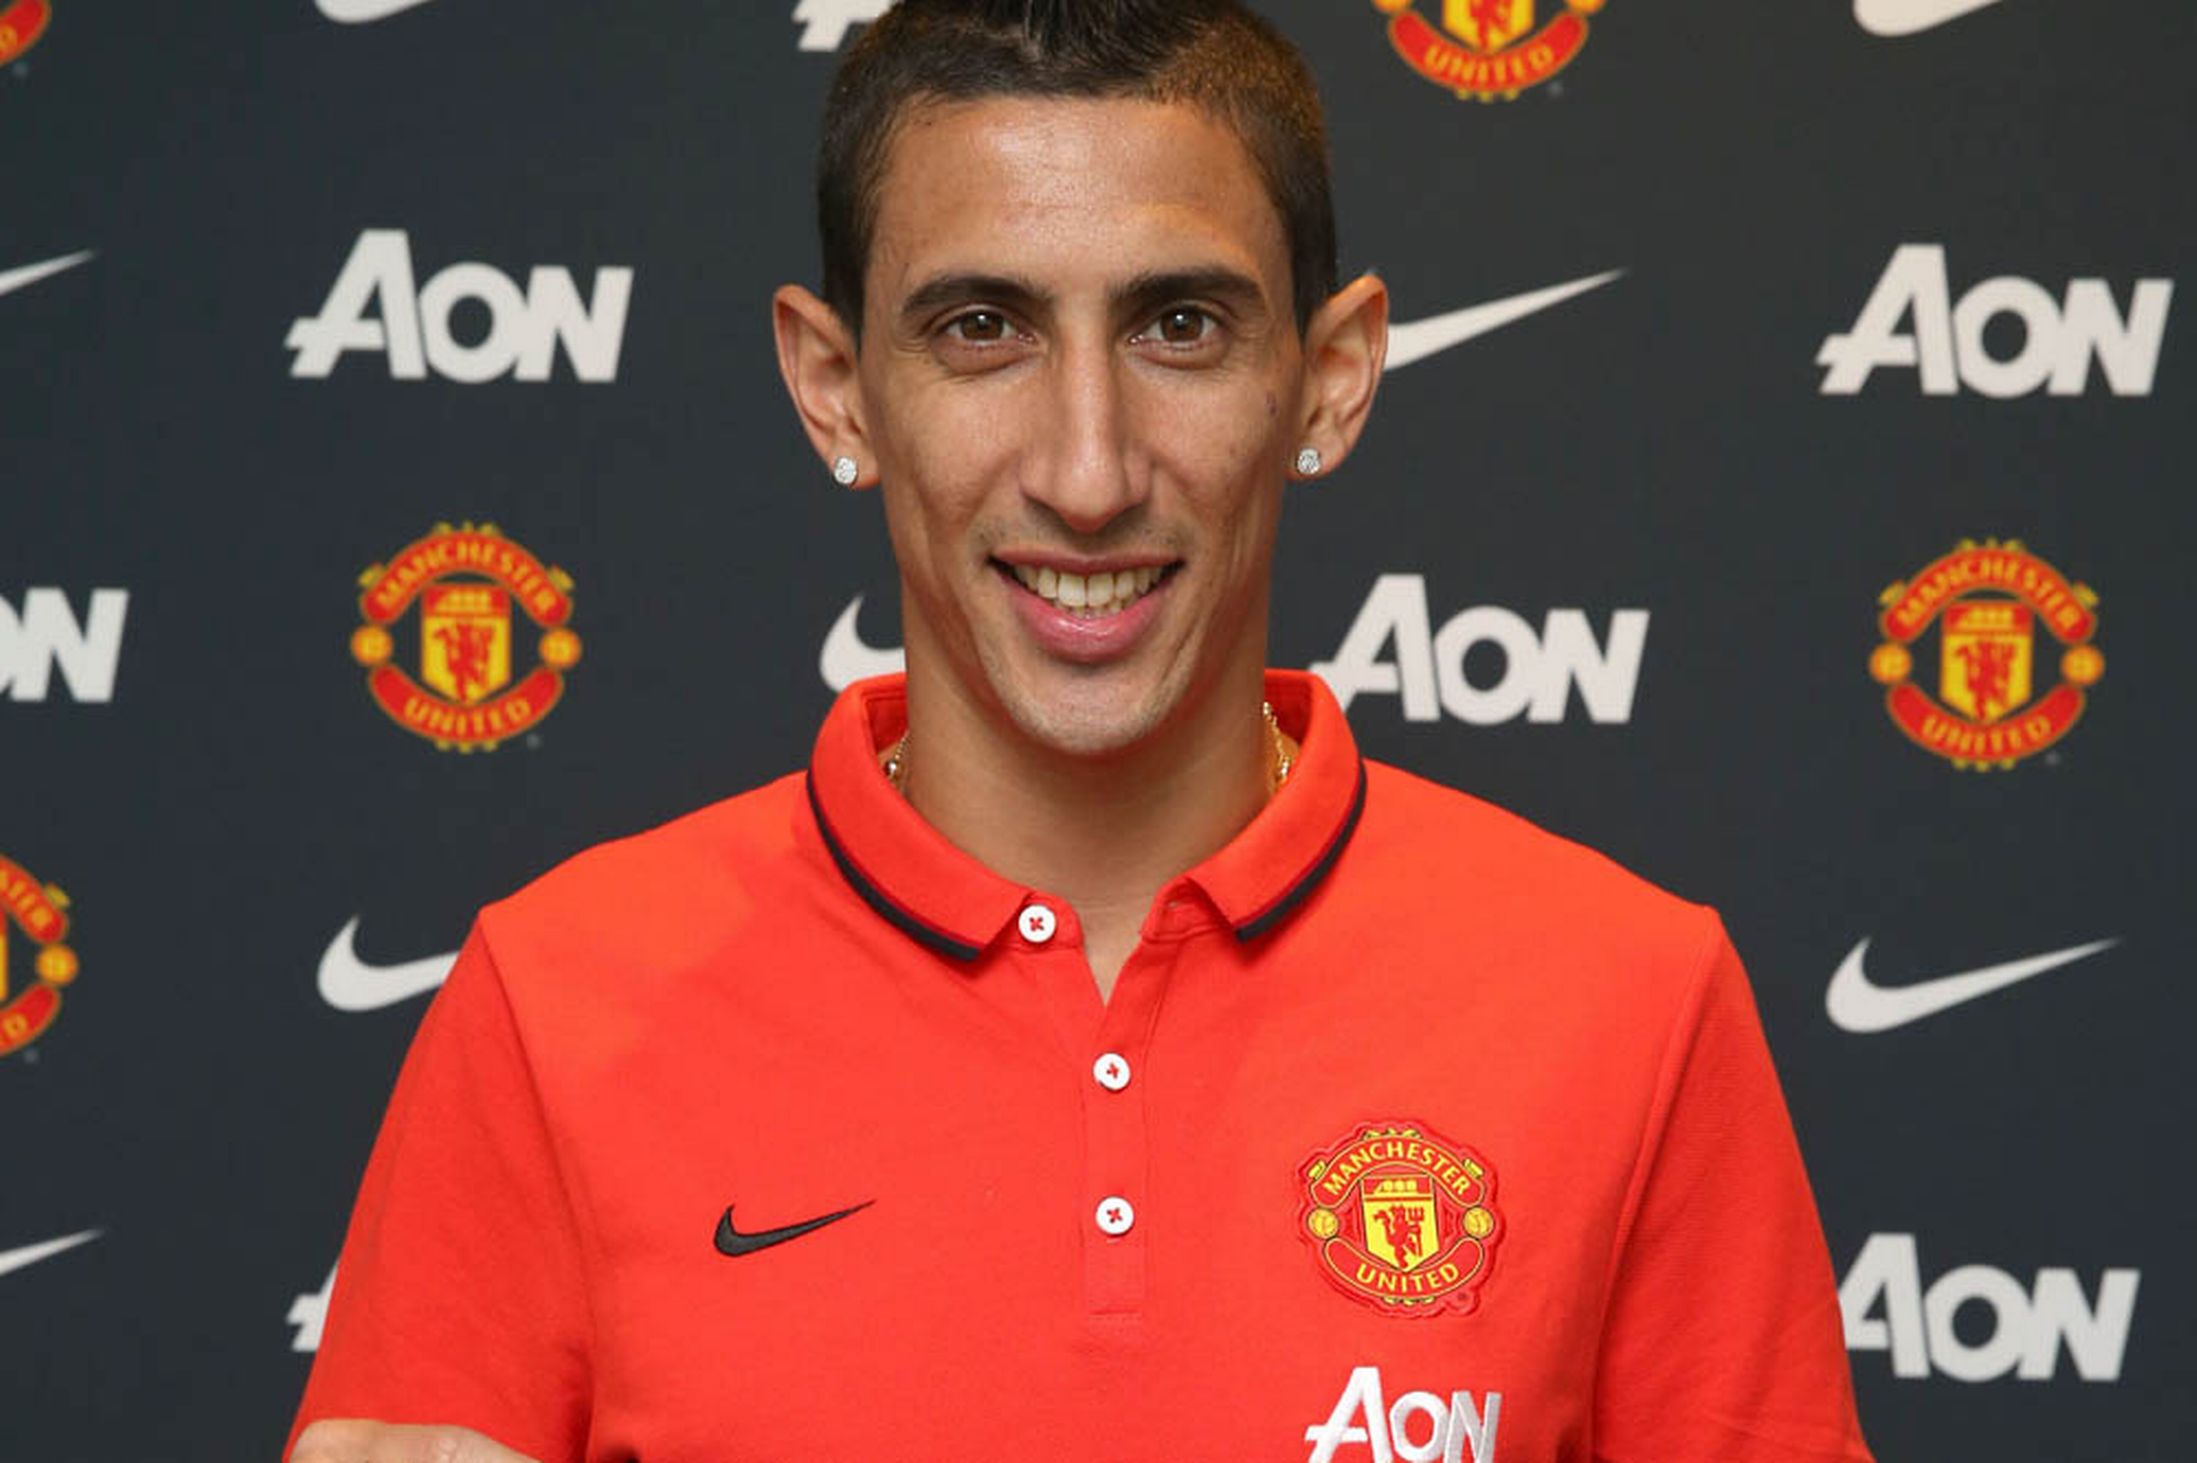 Attacking Contribution Metric and Man United’s reliance on Di María